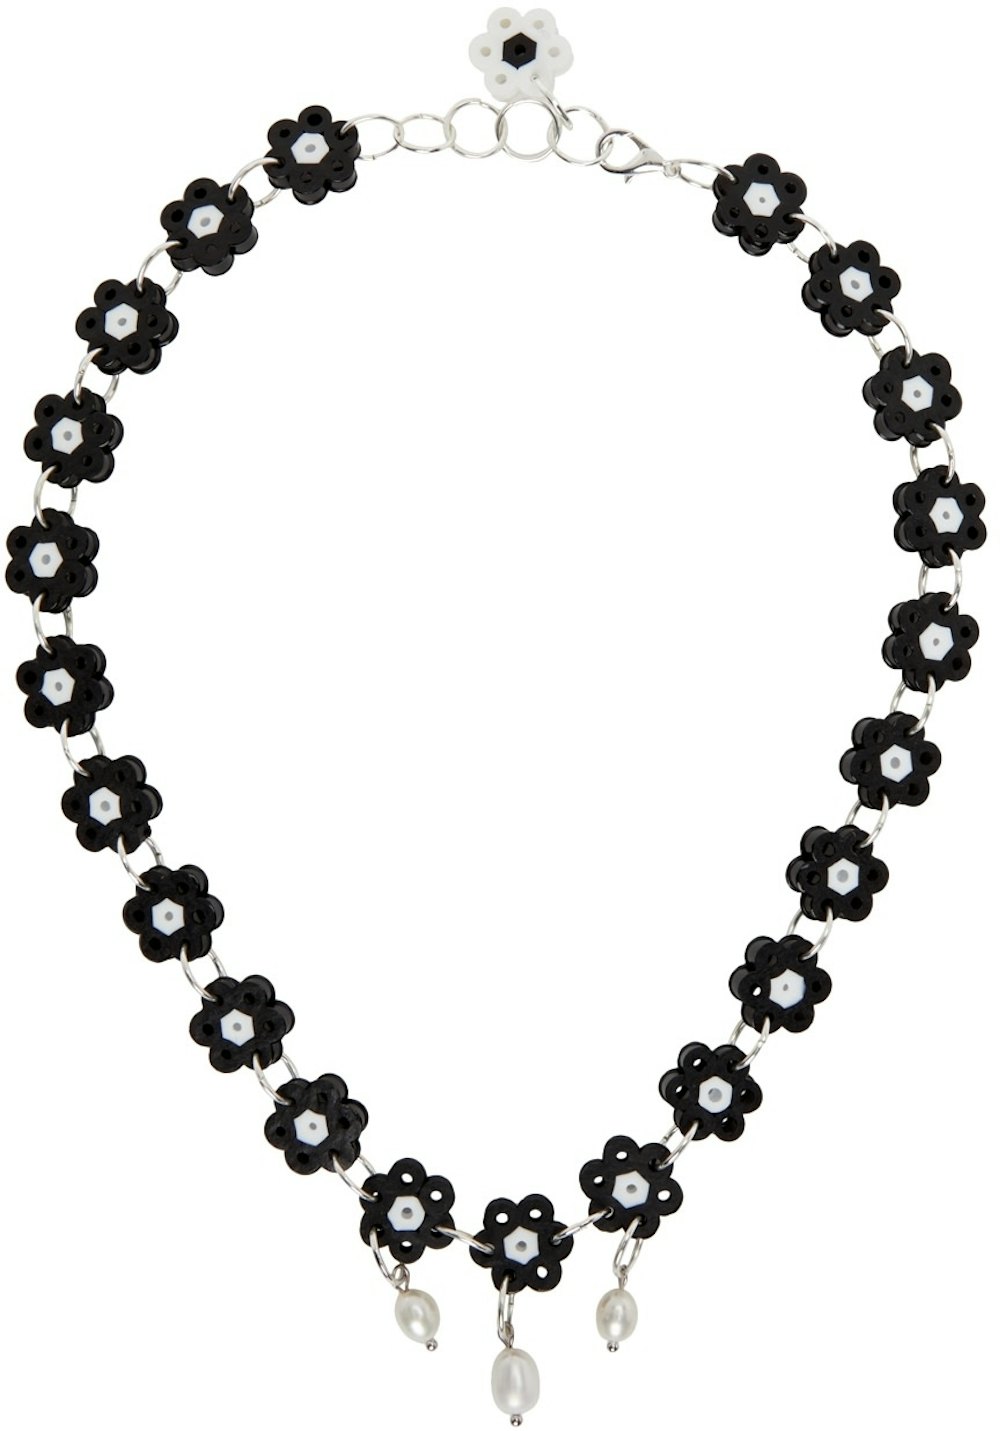 Black & White Daisy Chains Choker Necklace